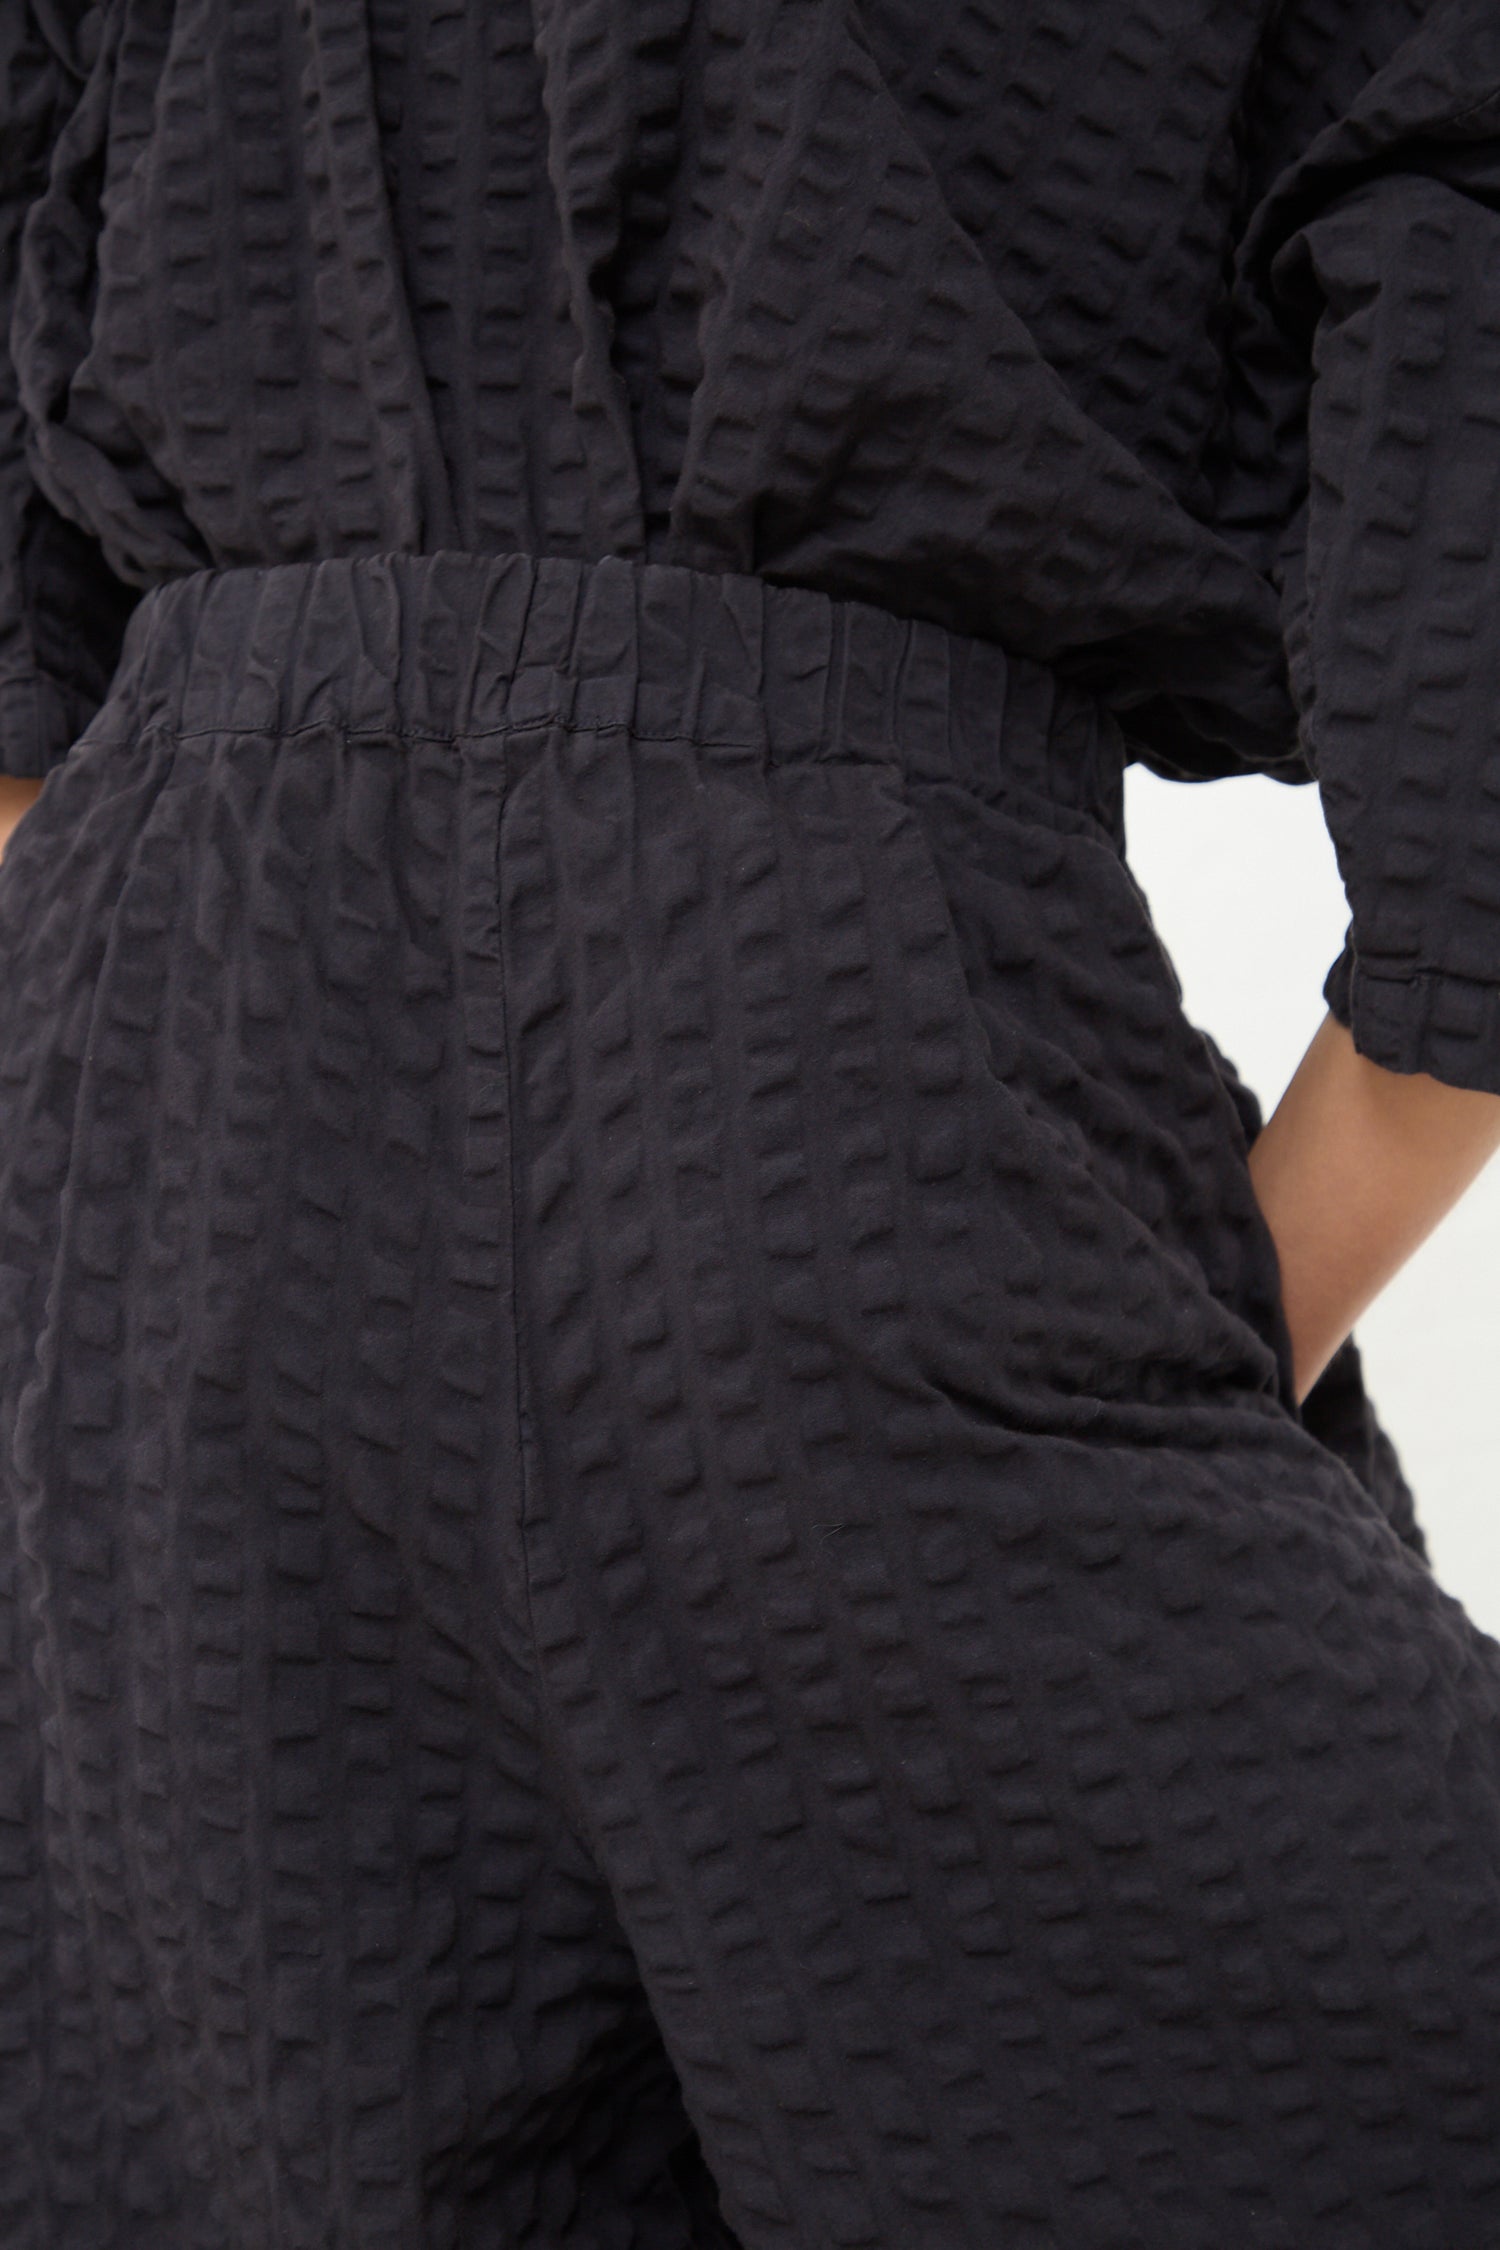 A close-up of a person wearing a Cotton Seersucker Wide Pant in Ink Black from Black Crane with an elastic waistband.